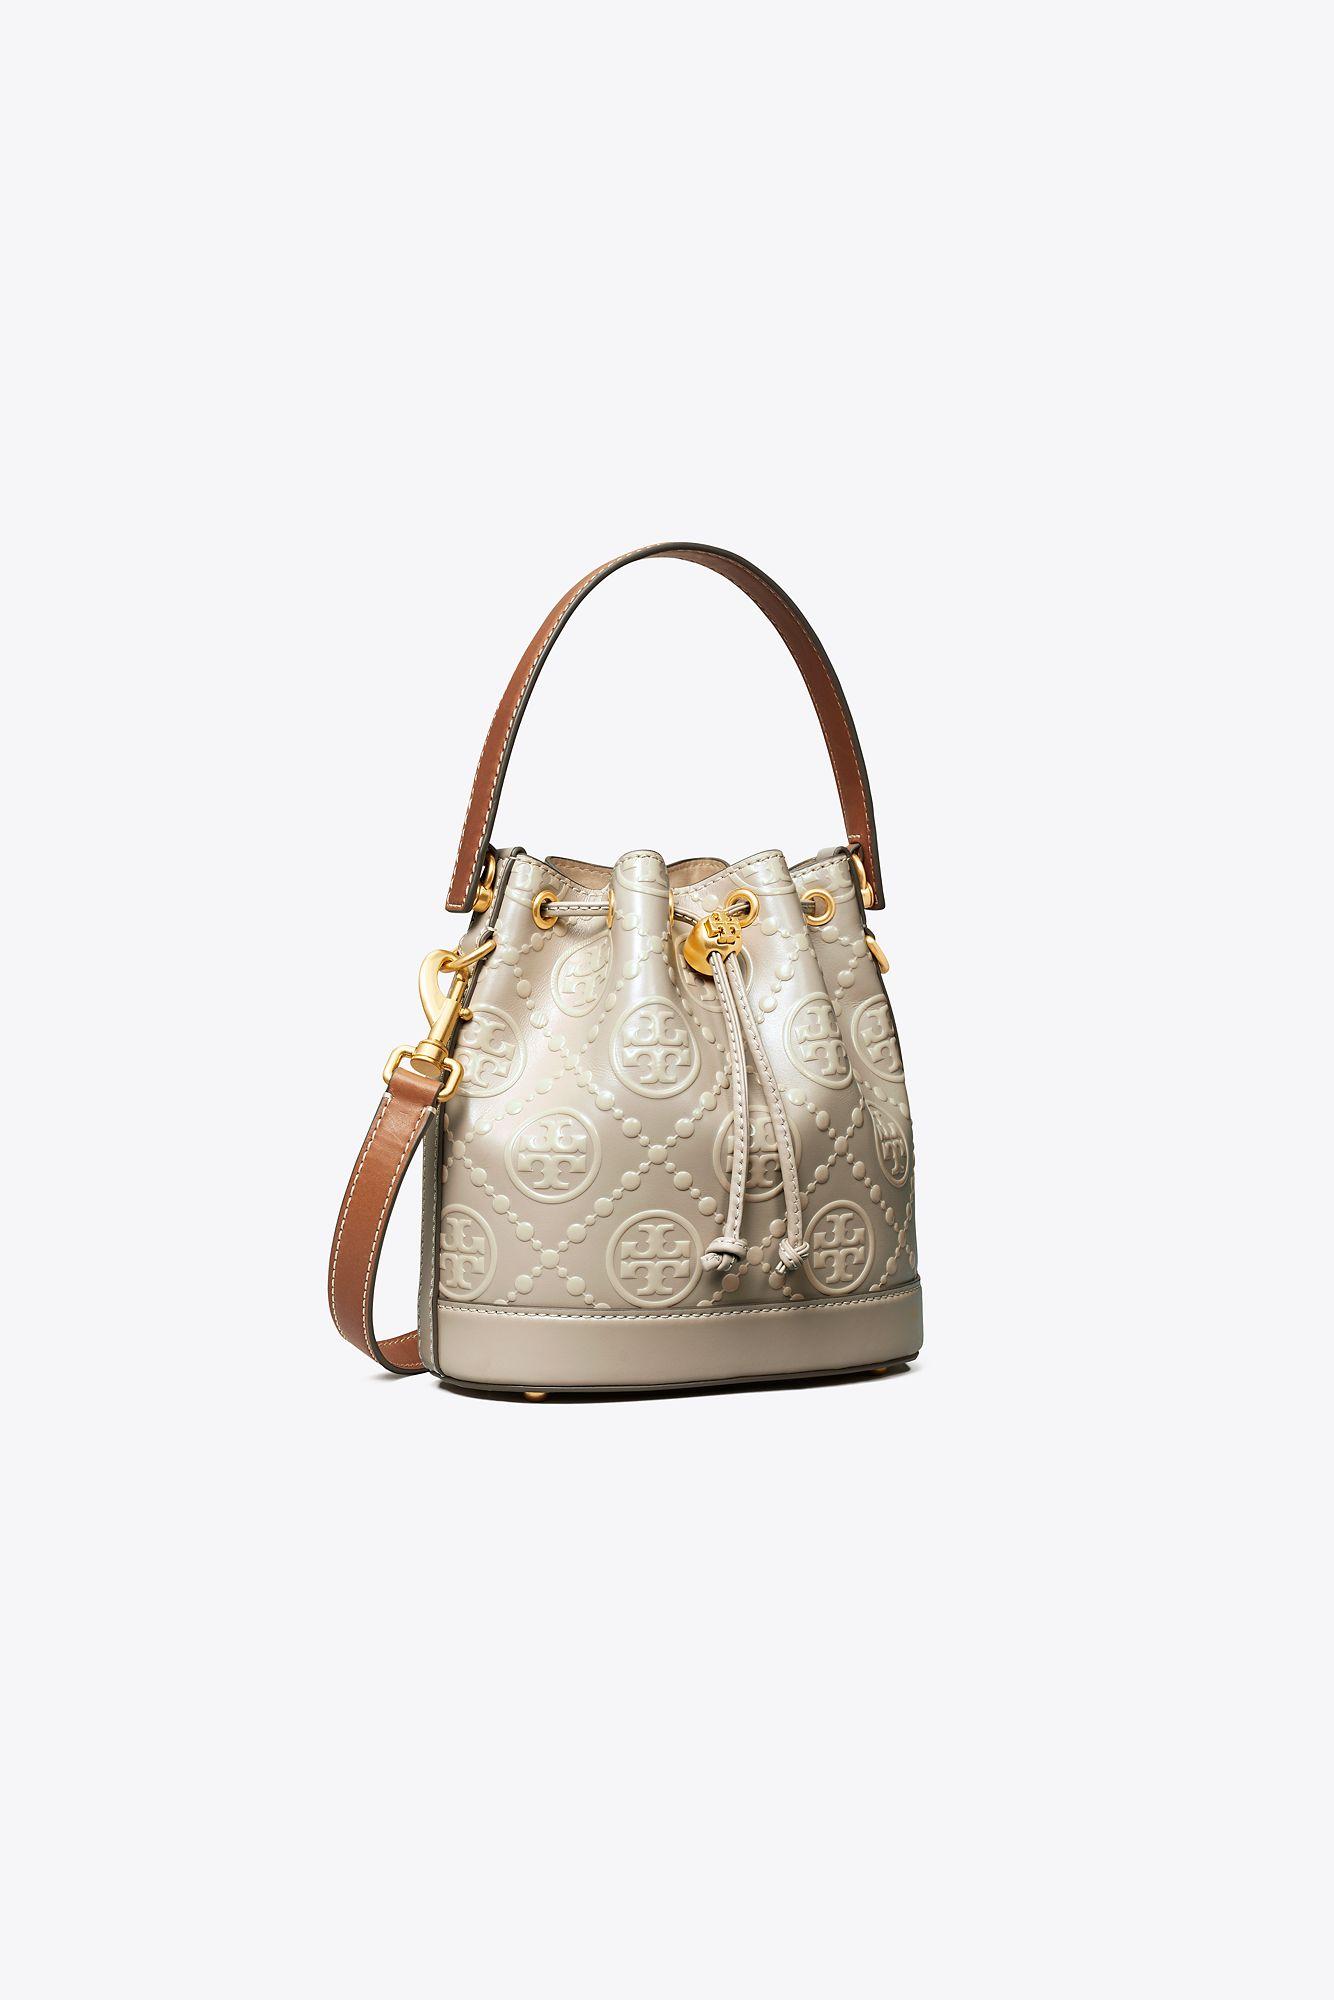 Tory Burch T Monogram Contrast Embossed Bucket Bag in White | Lyst Canada